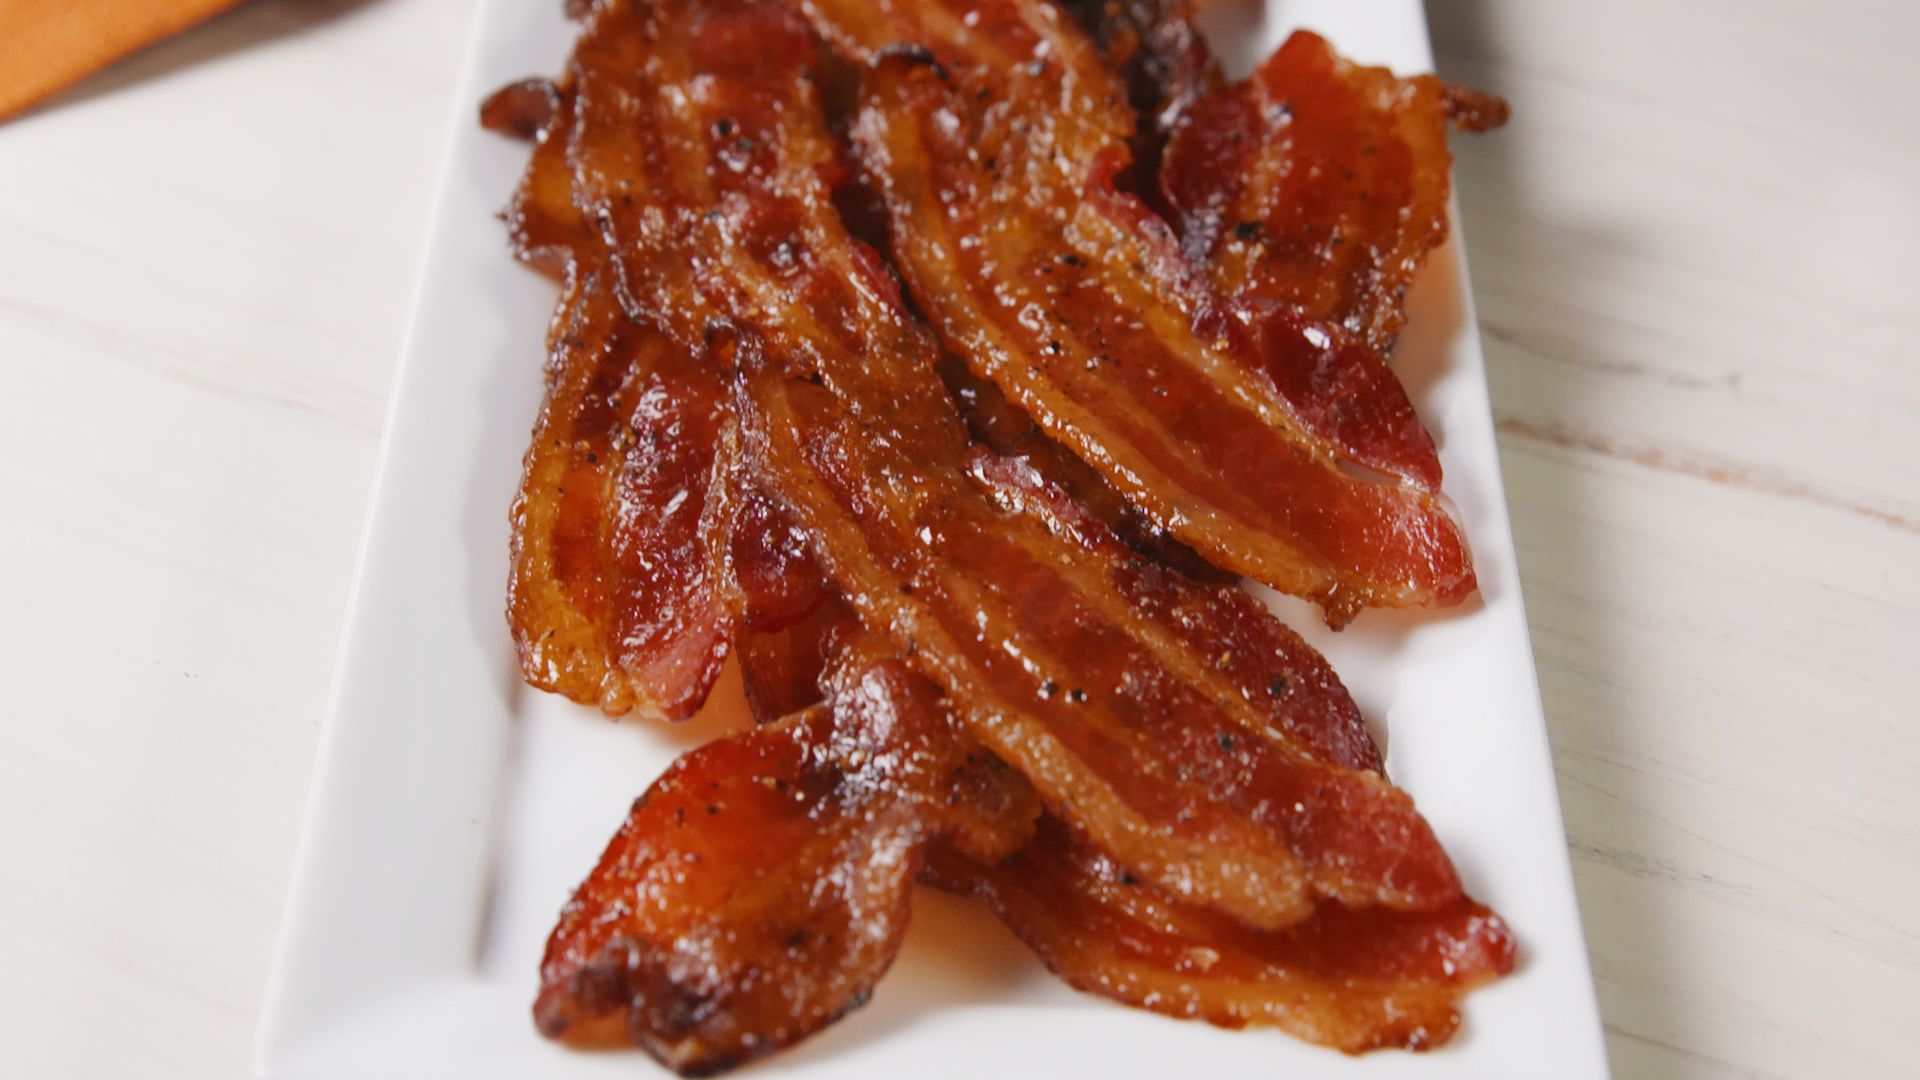 syrup bacon